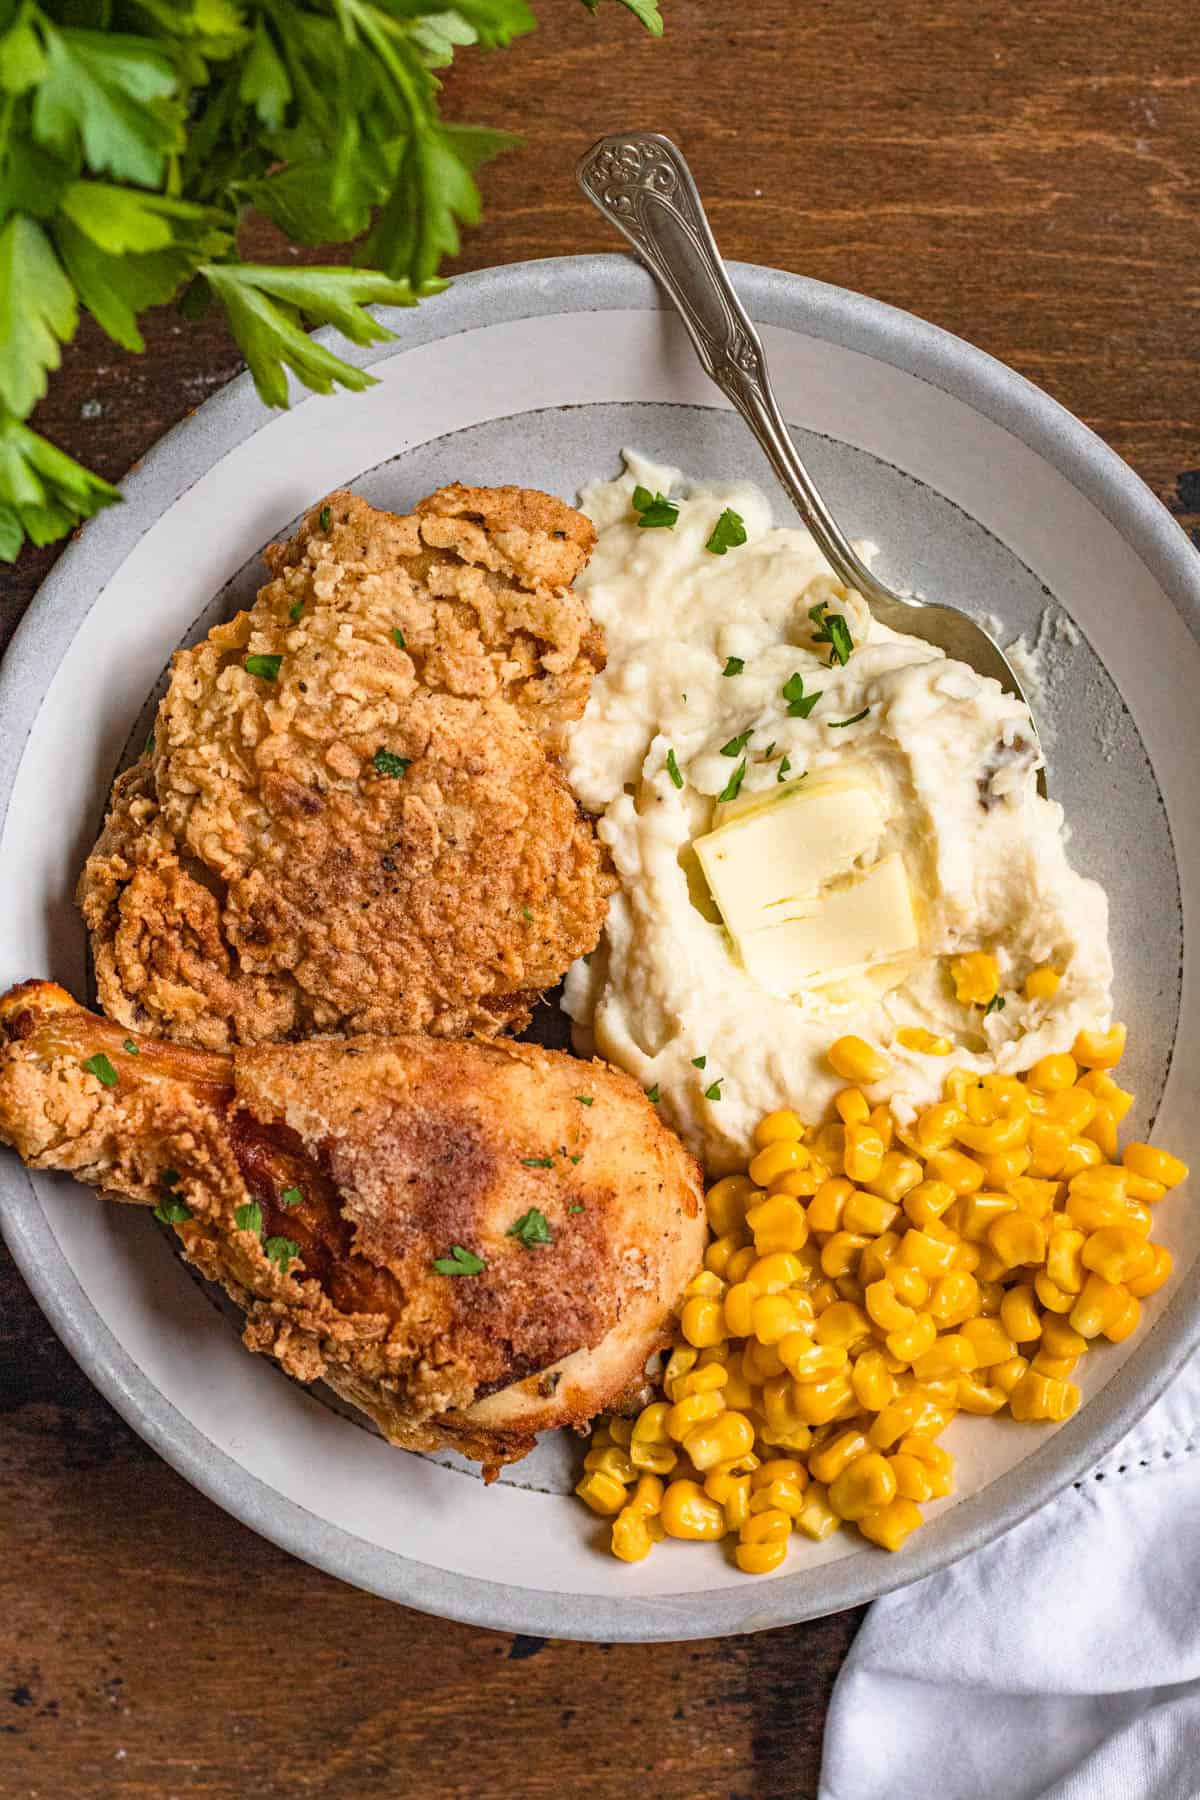 Gluten Free Fried Chicken Recipe on a plate with mashed potatoes